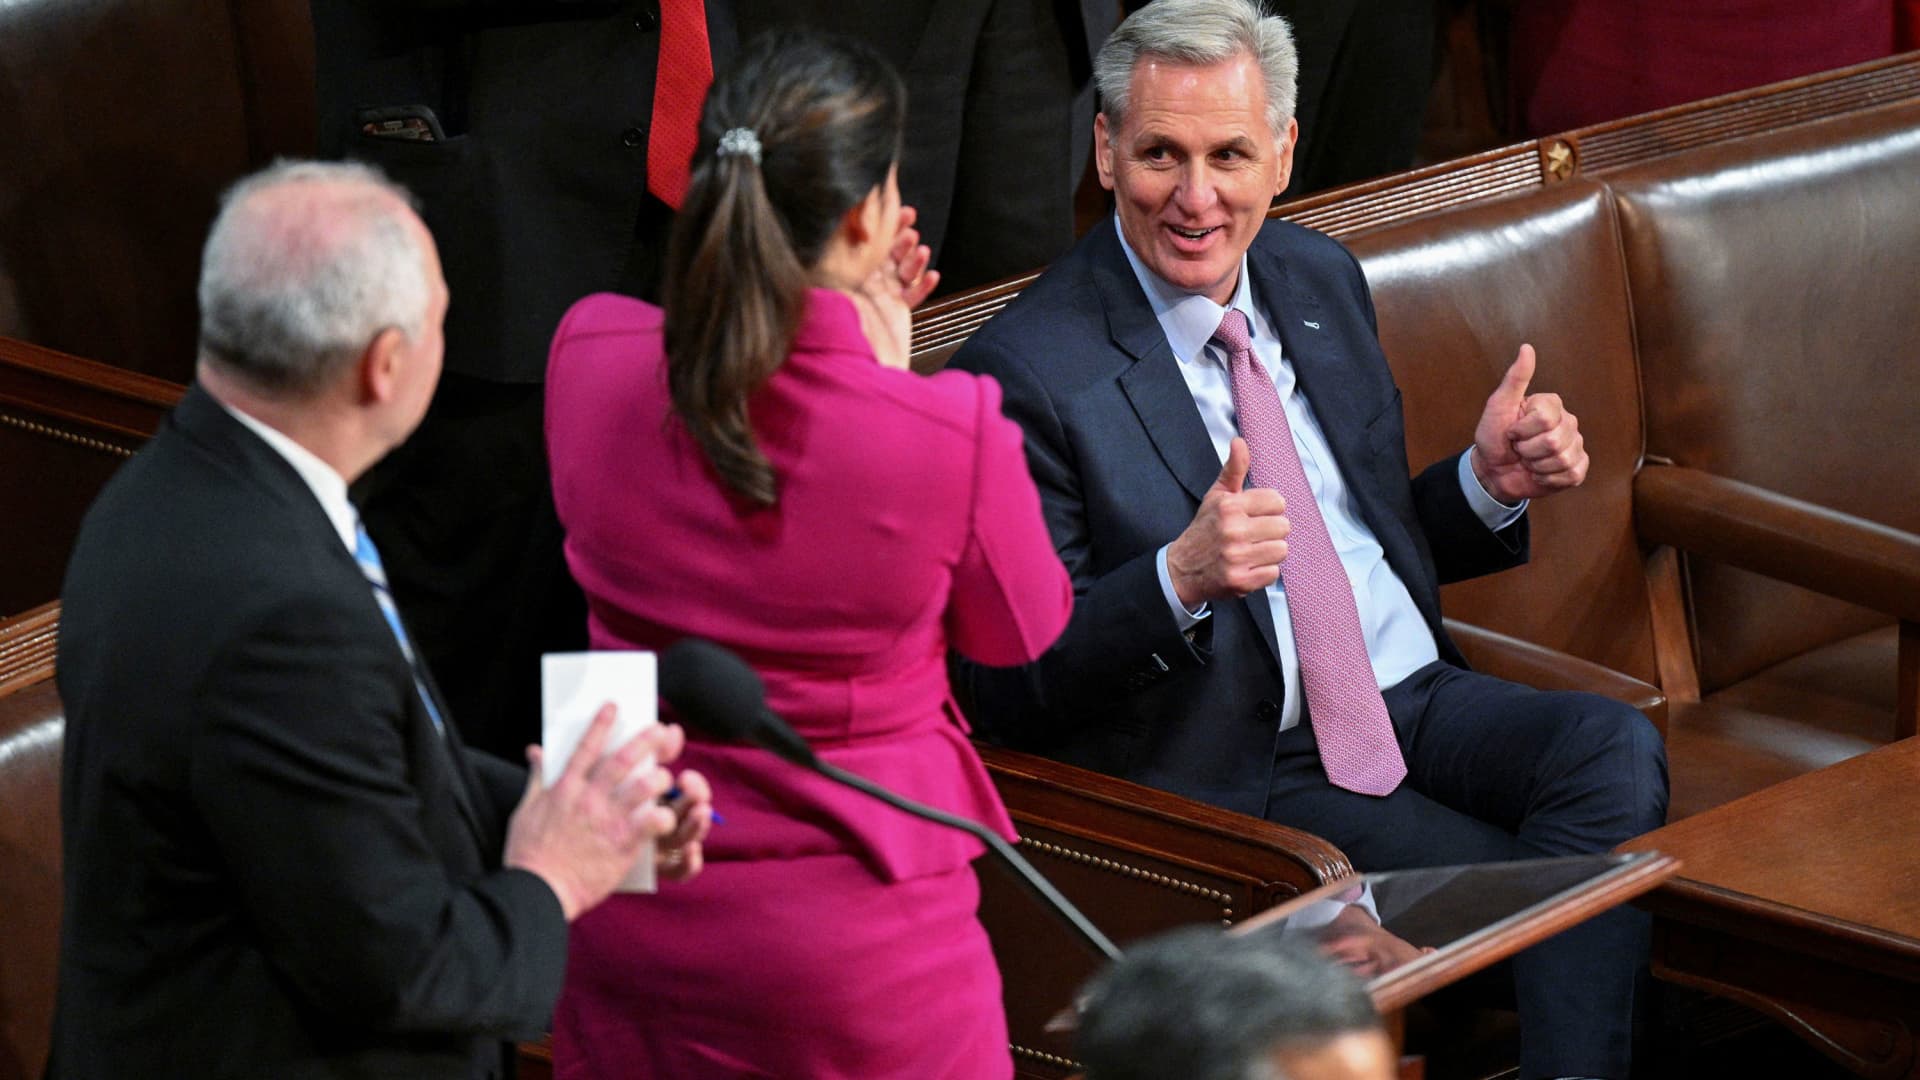 U.S. House Republican Leader Kevin McCarthy (R-CA) gives two thumbs up in the direction of Republican Conference Chair Elise Stefanik (R-NY) and Republican Whip Steve Scalise (R-LA) after casting his own vote for himself in the 12th round of voting for a new Speaker on the 4th day of the 118th Congress at the U.S. Capitol in Washington, January 6, 2023.